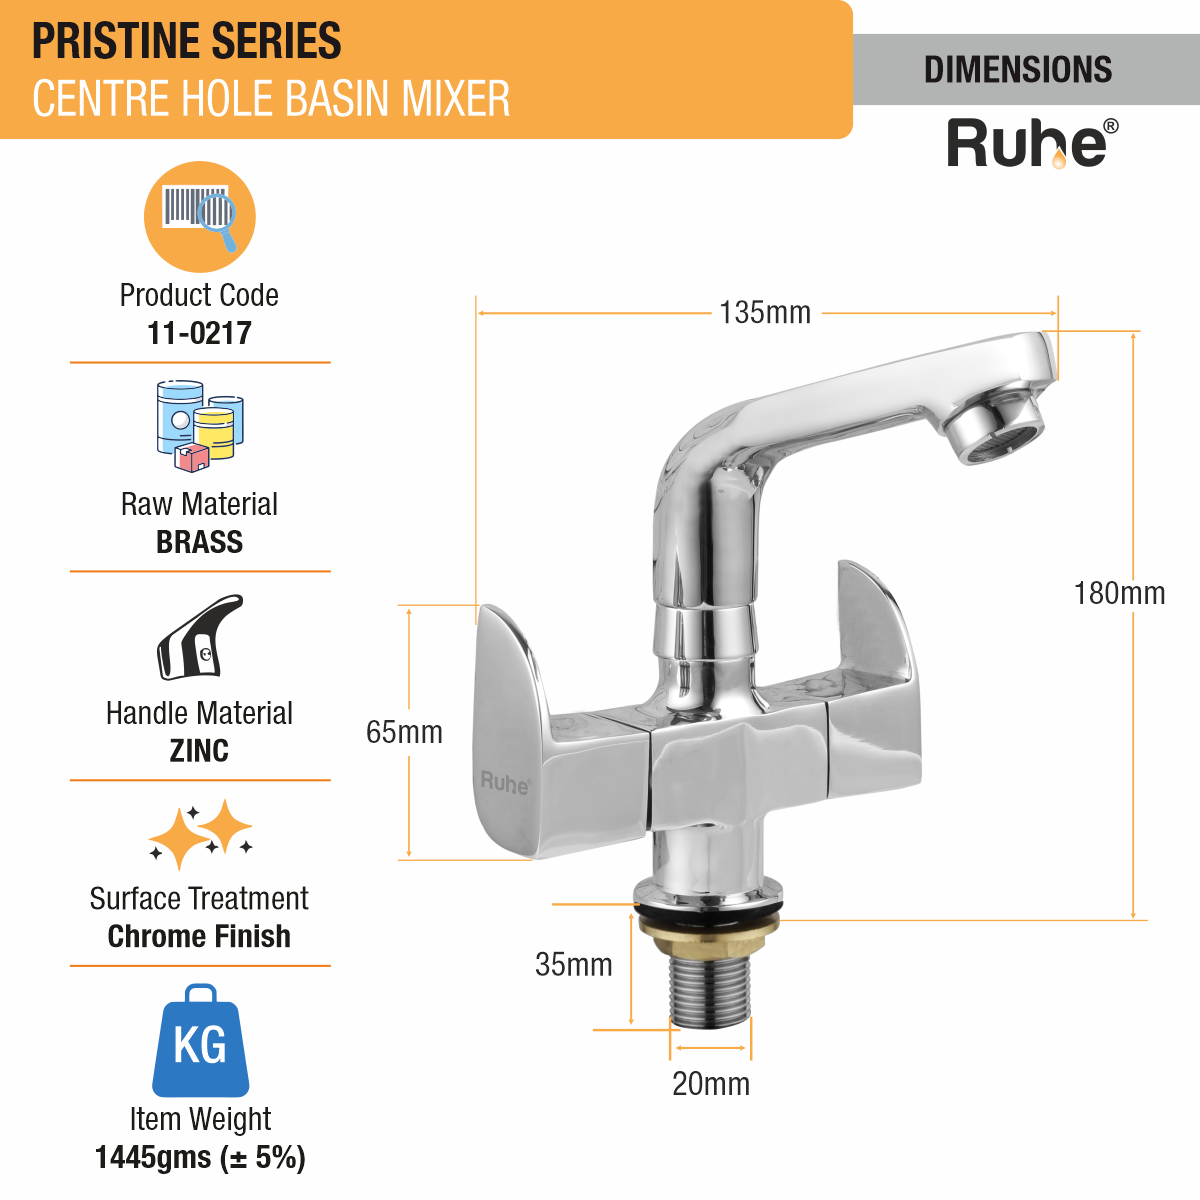 Pristine Centre Hole Basin Mixer with Small (7 inches) Swivel Spout Faucet dimensions and size